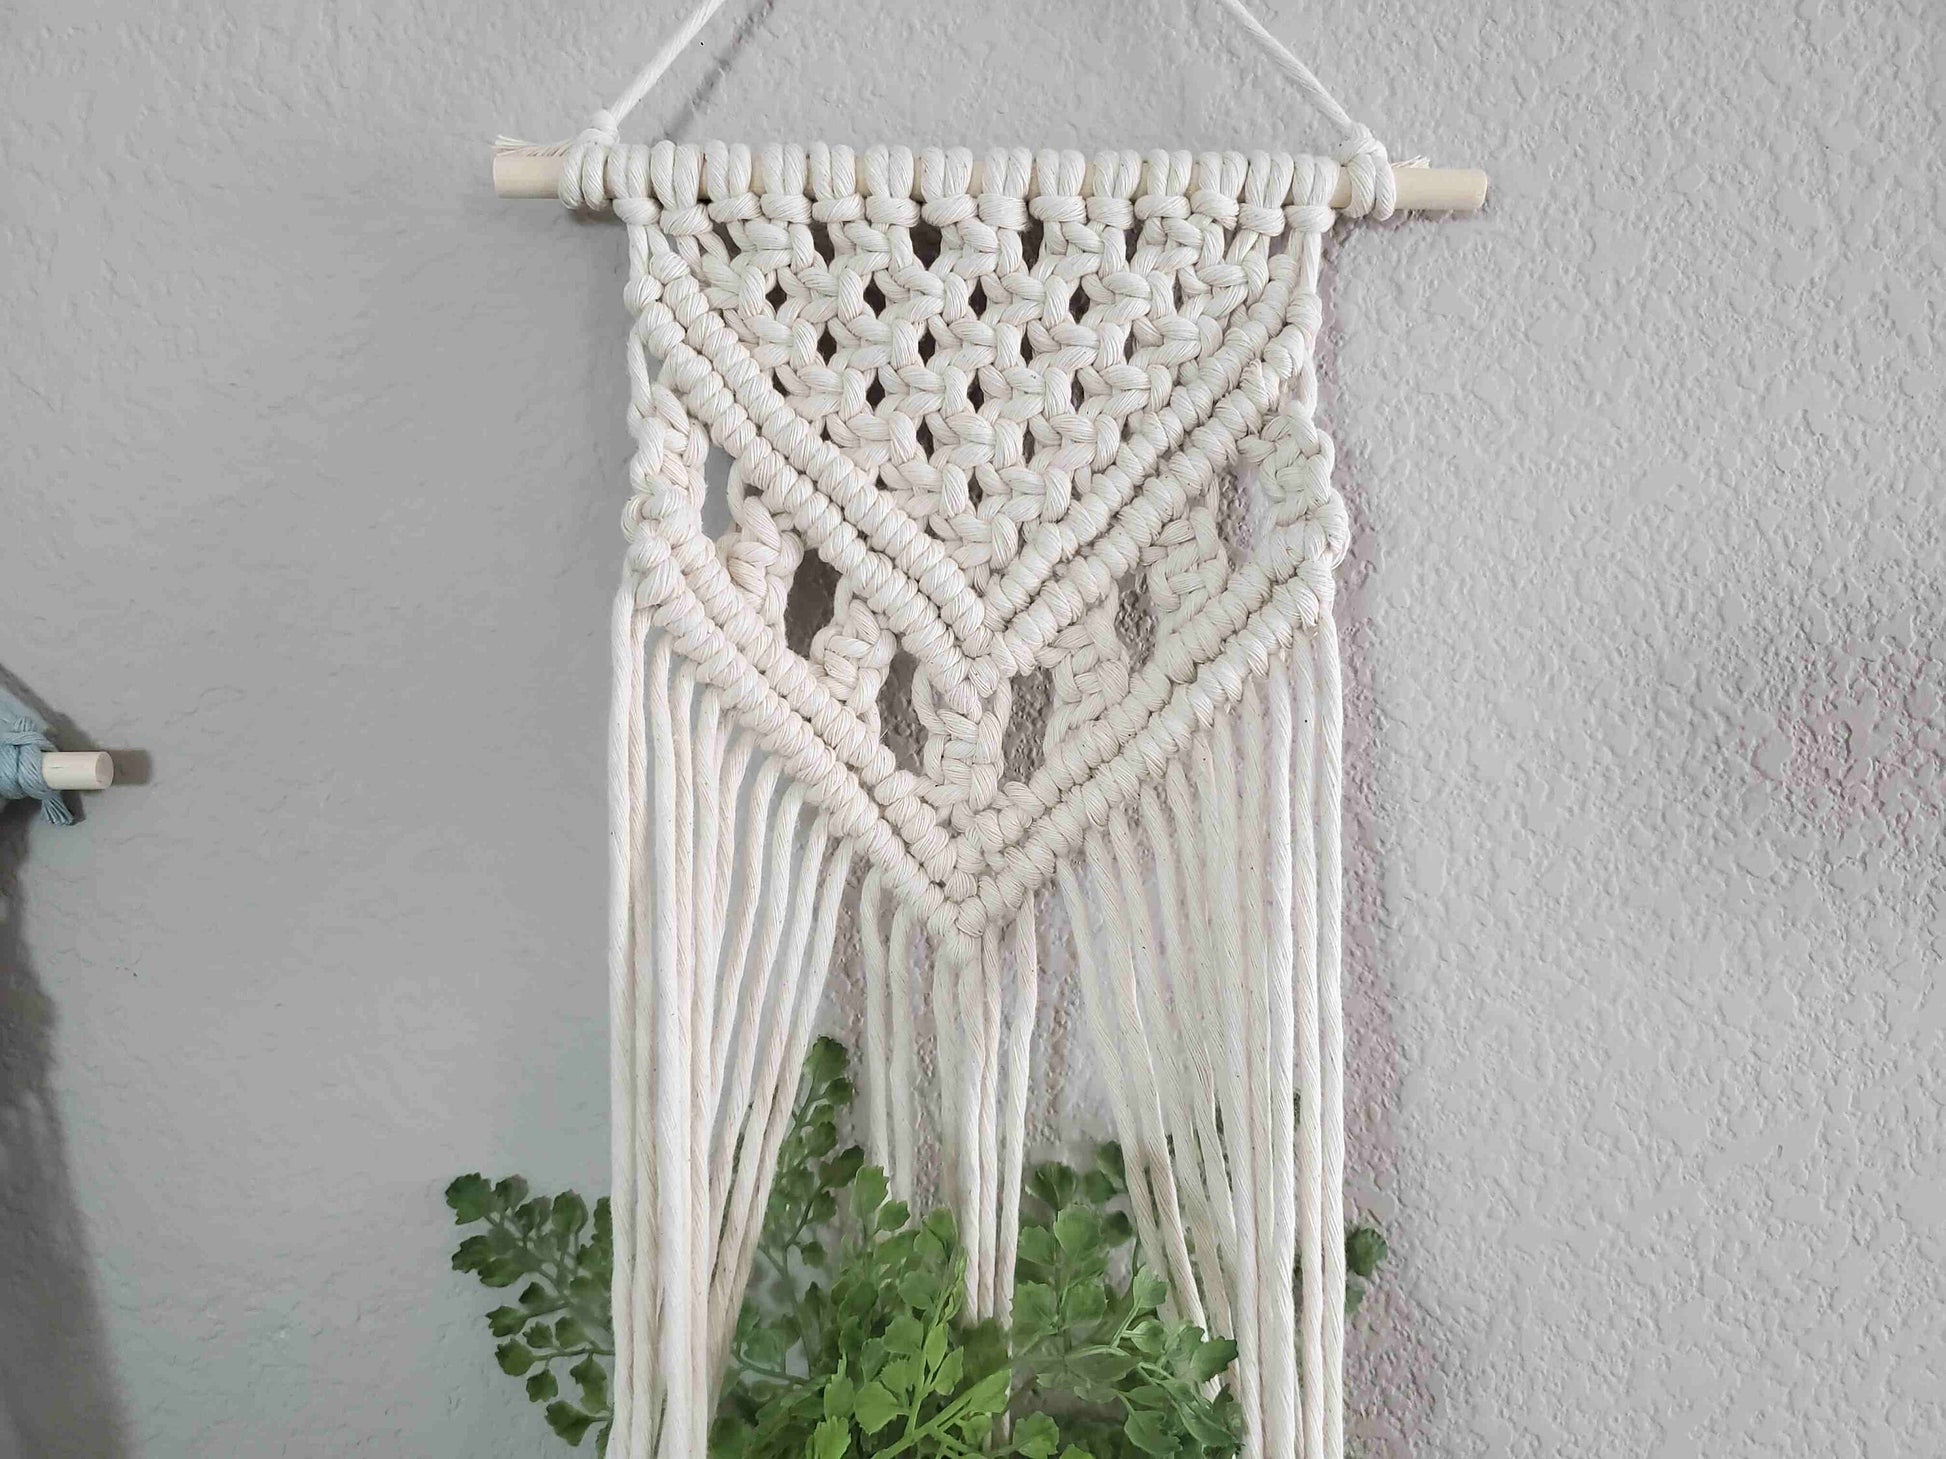 Beginner Macrame Plant Hanger Kit. Craft Kits for Adults and Kids